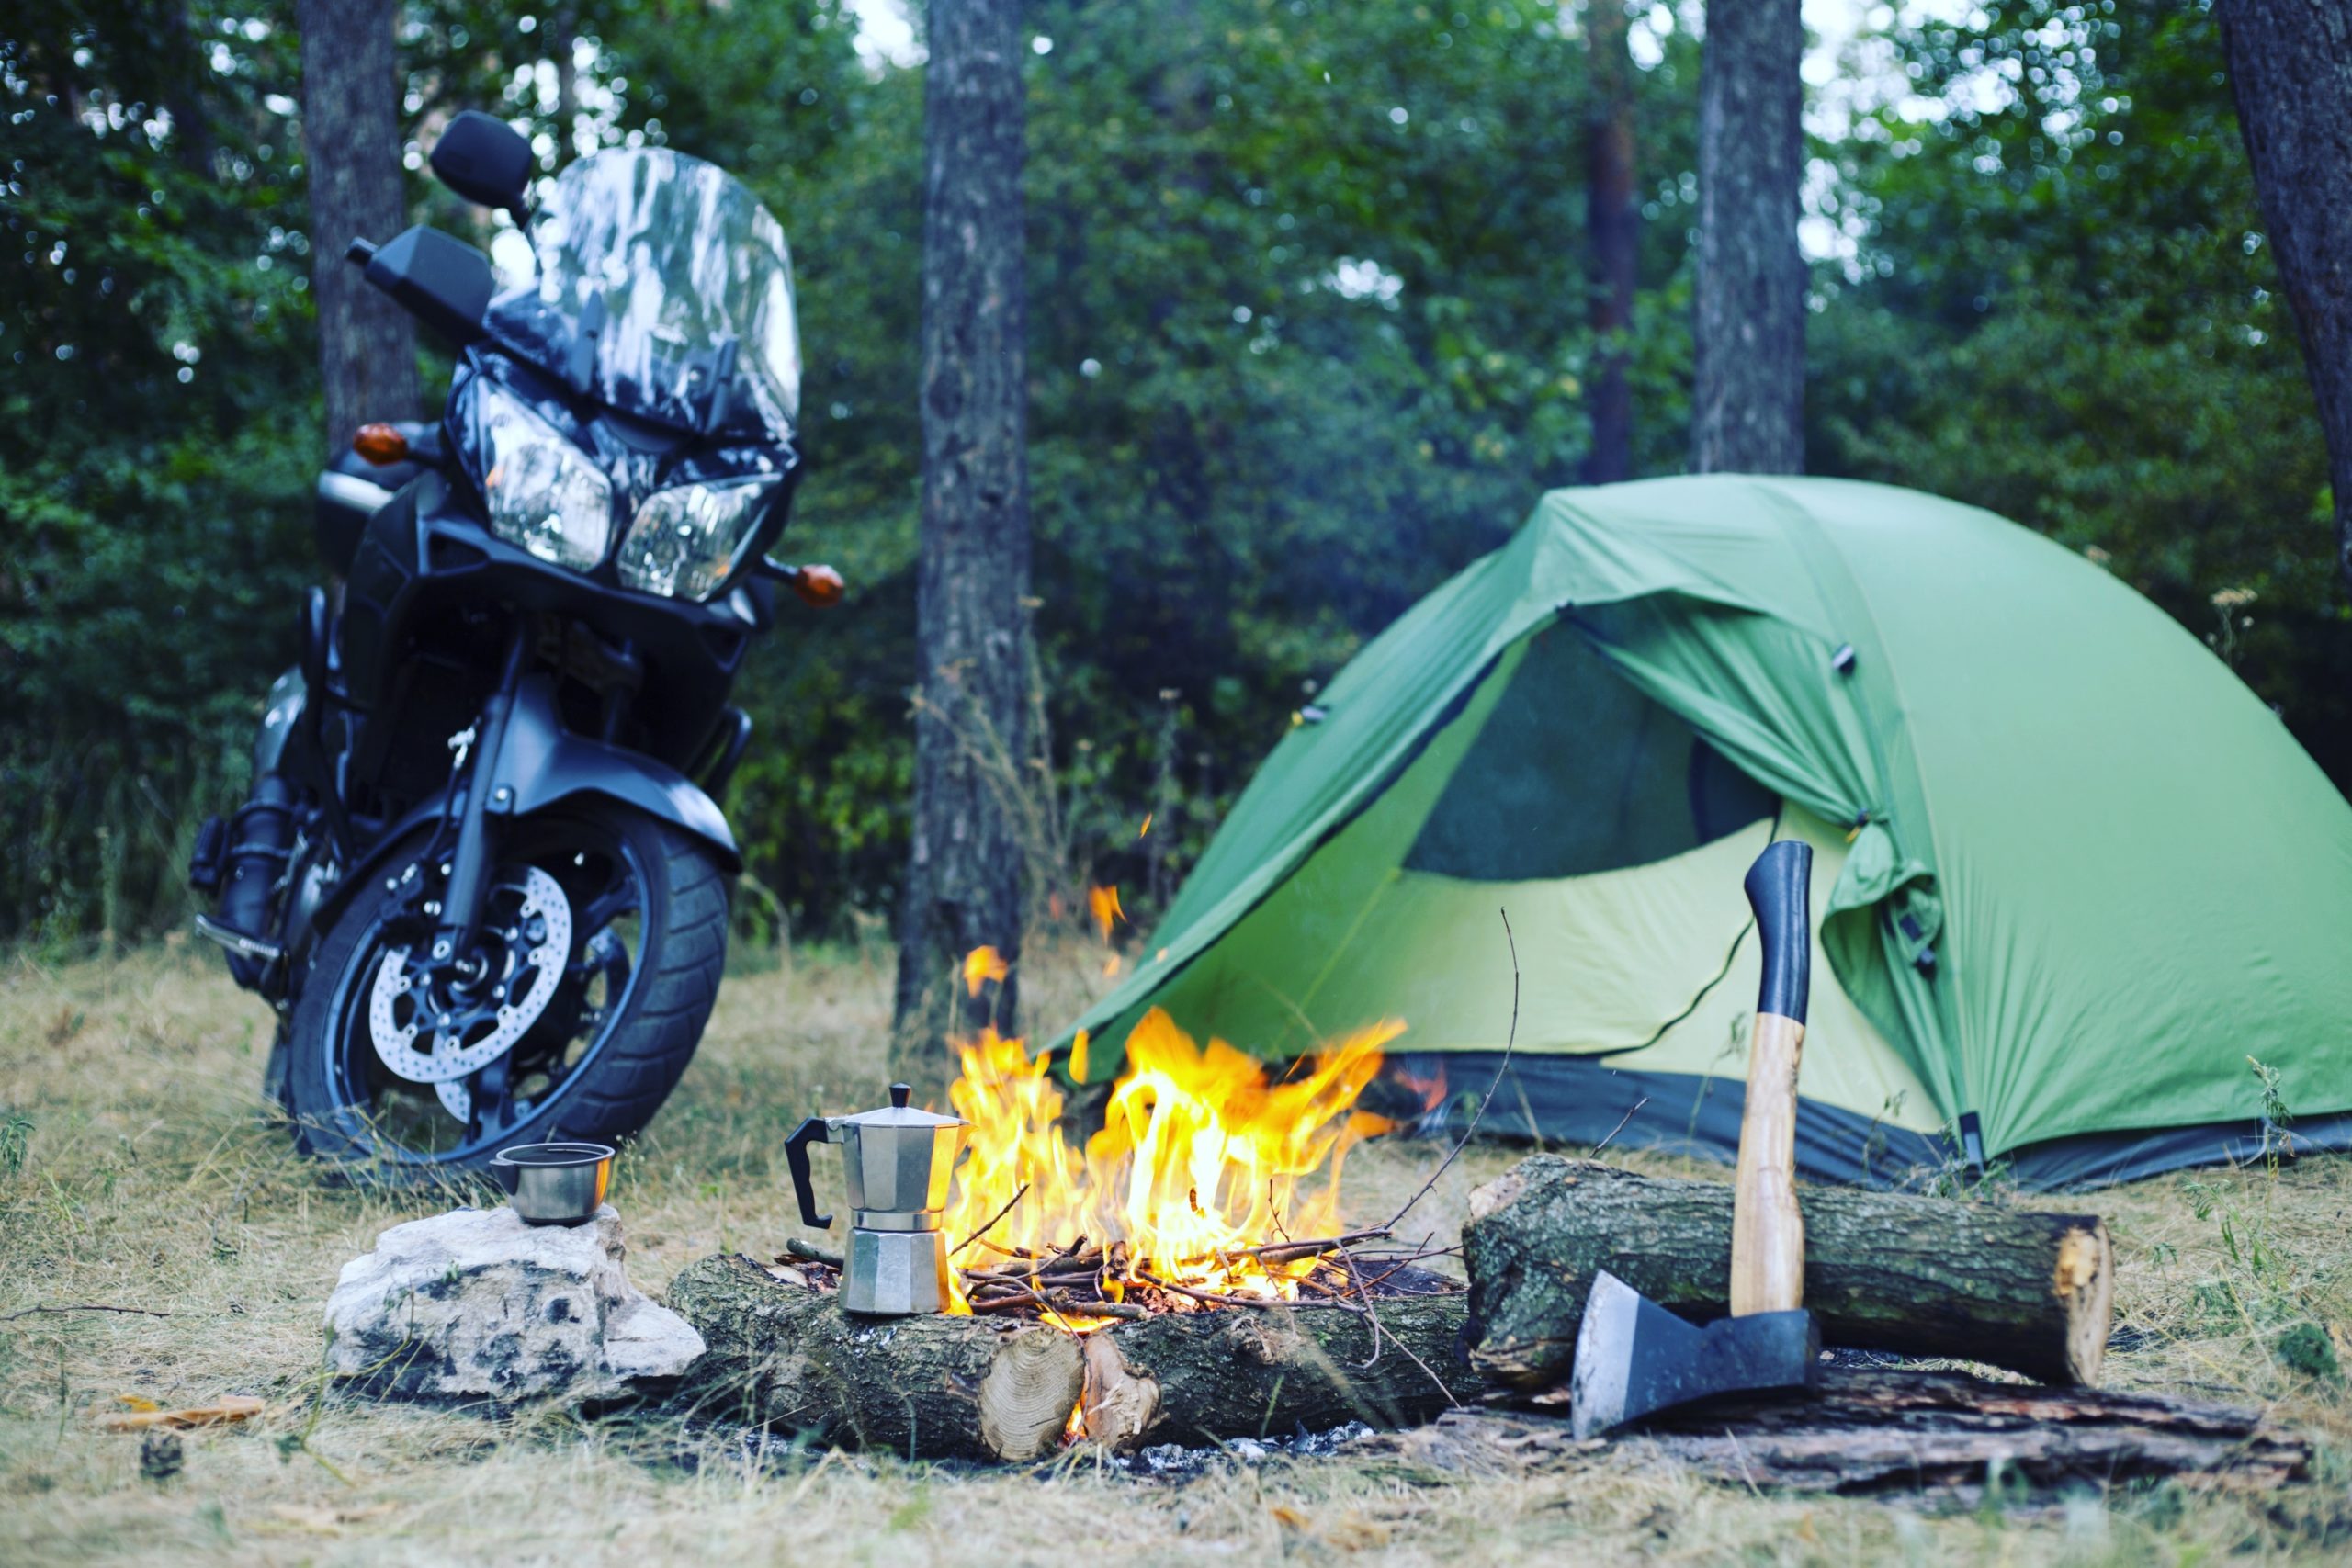 Motorcycle Camping | The Adventures of Froggy & Looneysam